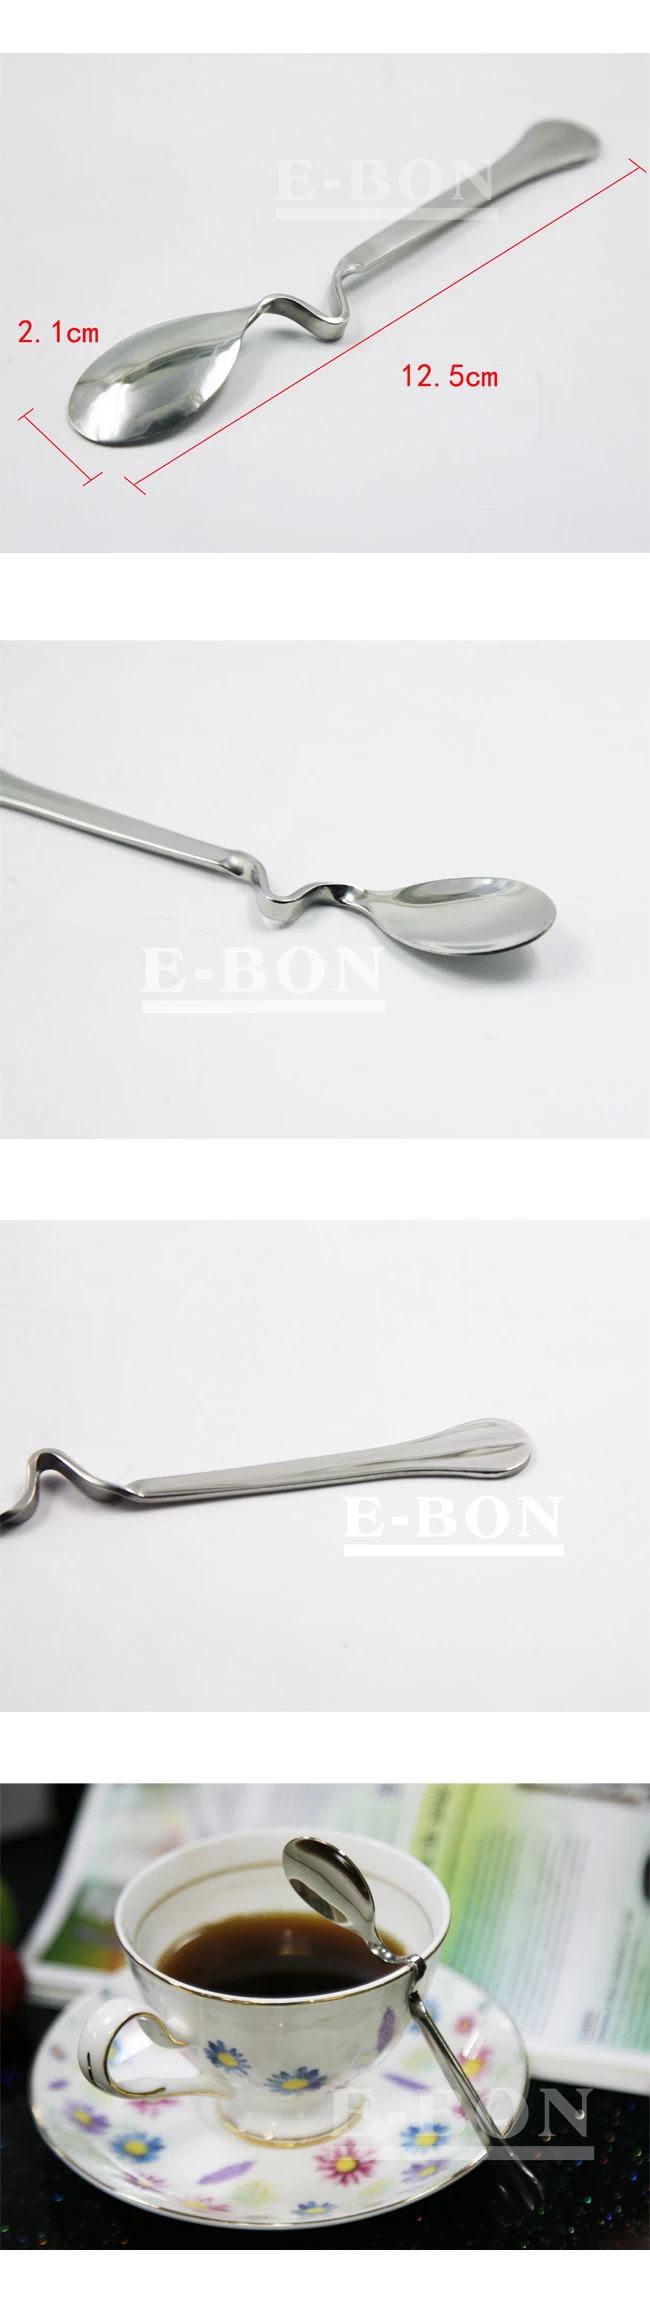 Stainless steel twisted spoon